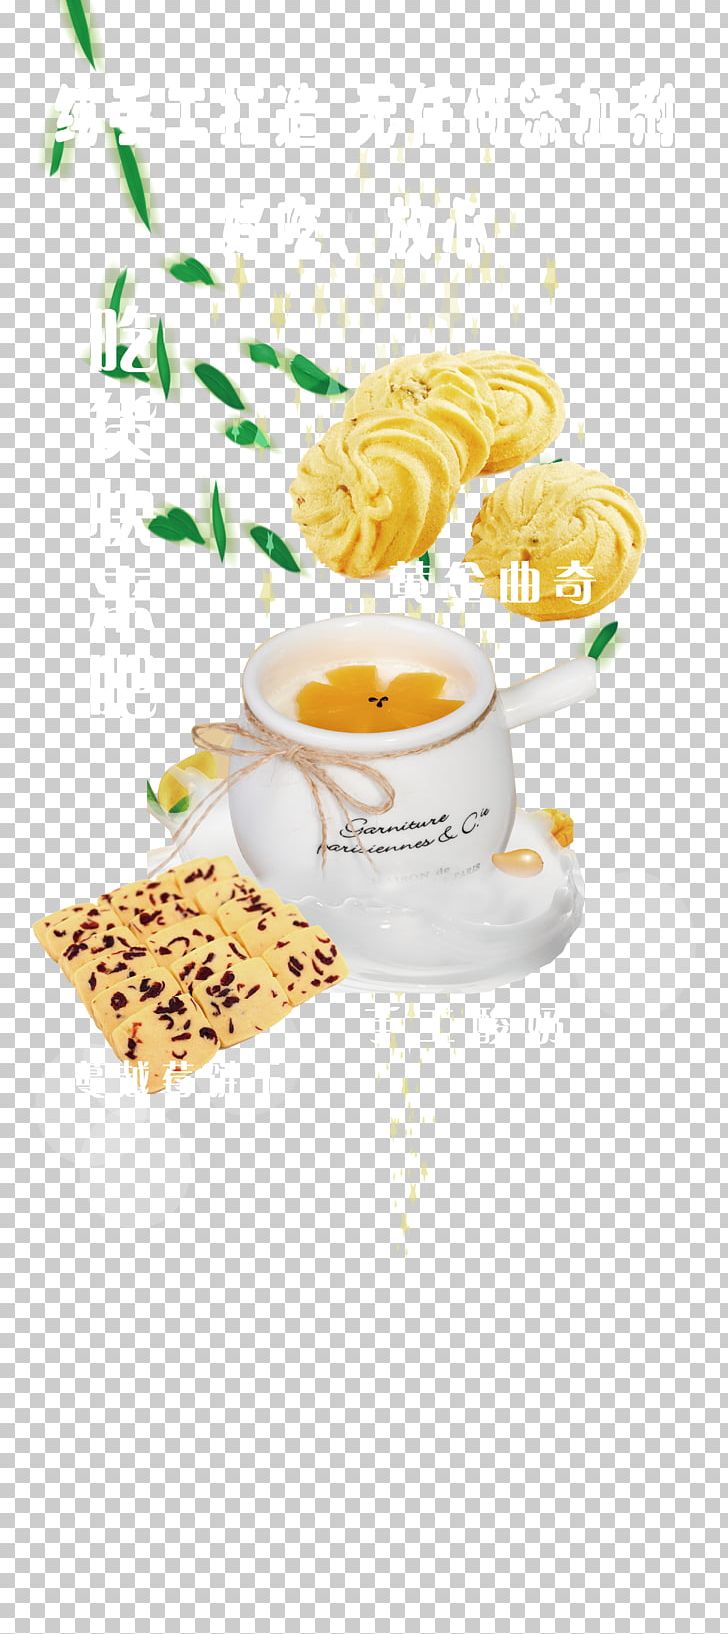 HTTP Cookie PNG, Clipart, Biscuits, Butter Cookies, Cake, Chocolate, Chocolate Chip Cookies Free PNG Download